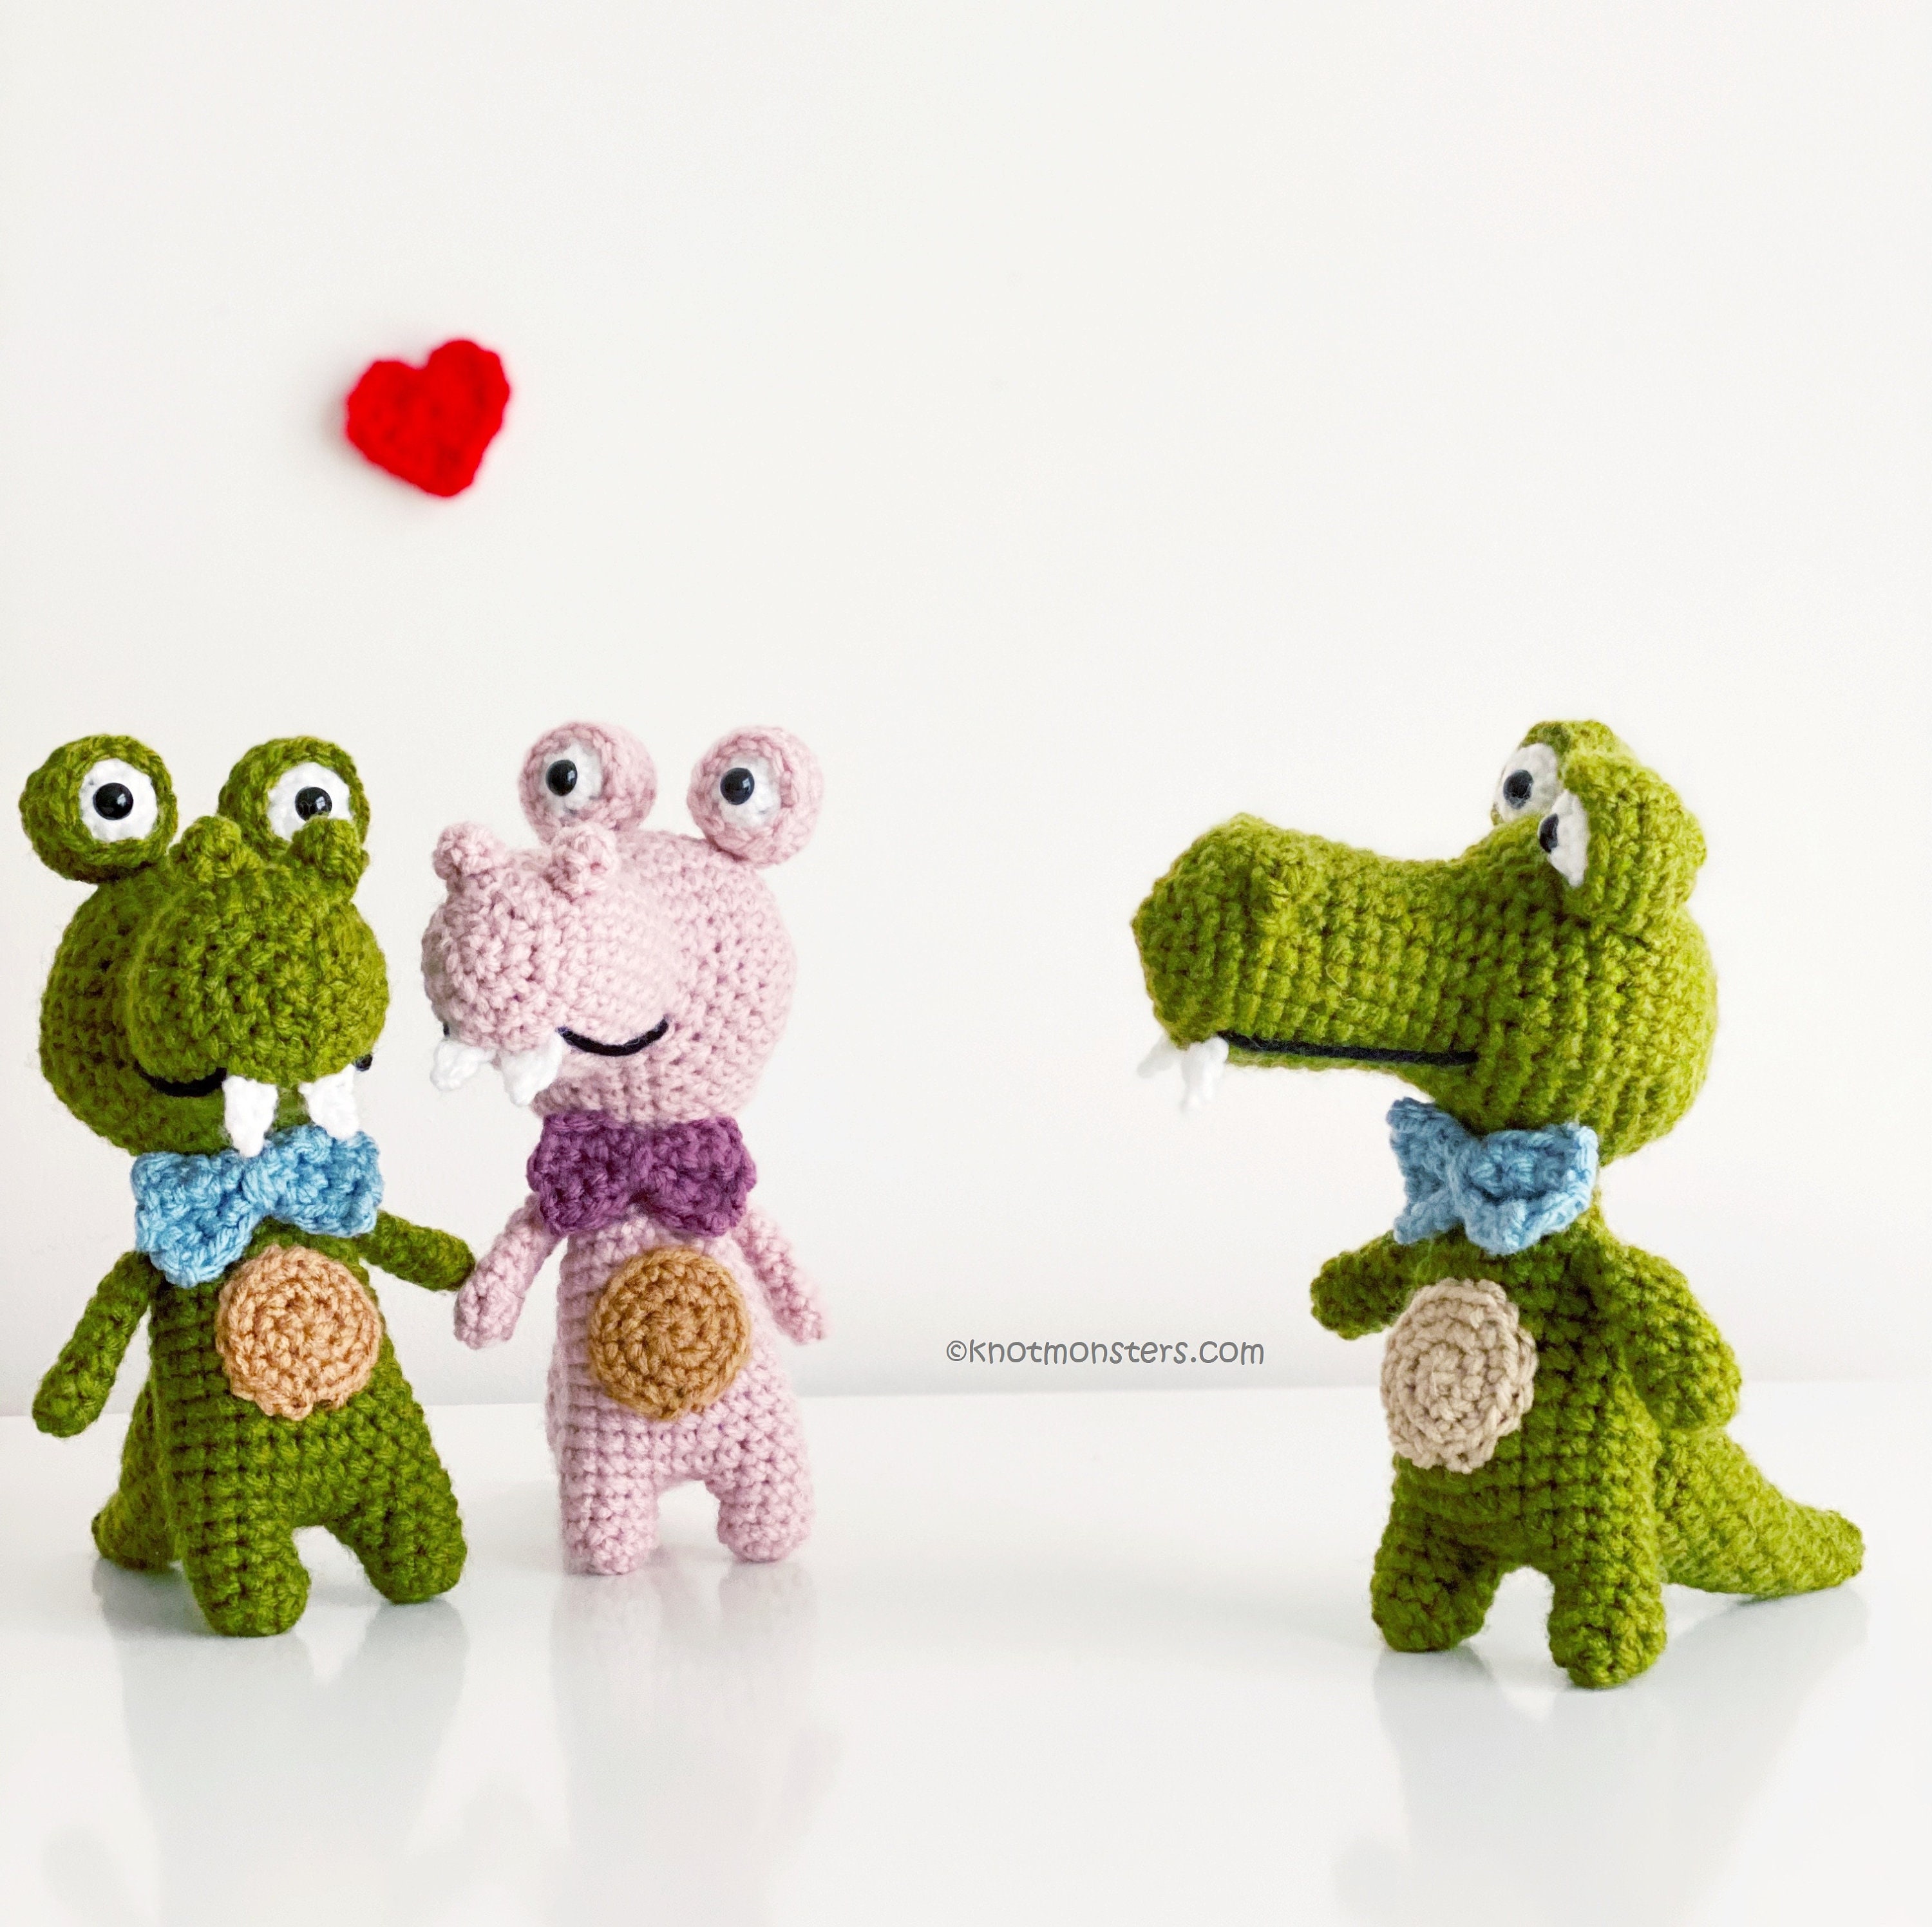  You Can Do It! Amigurumi for Beginners: How to Crochet 24  Adorable Stuffed Animals, Keychains, Bottle Covers, Halloween & Christmas  Themes with Step-By-Step Instructions and Pictures eBook : Samir, Maggie:  Kindle